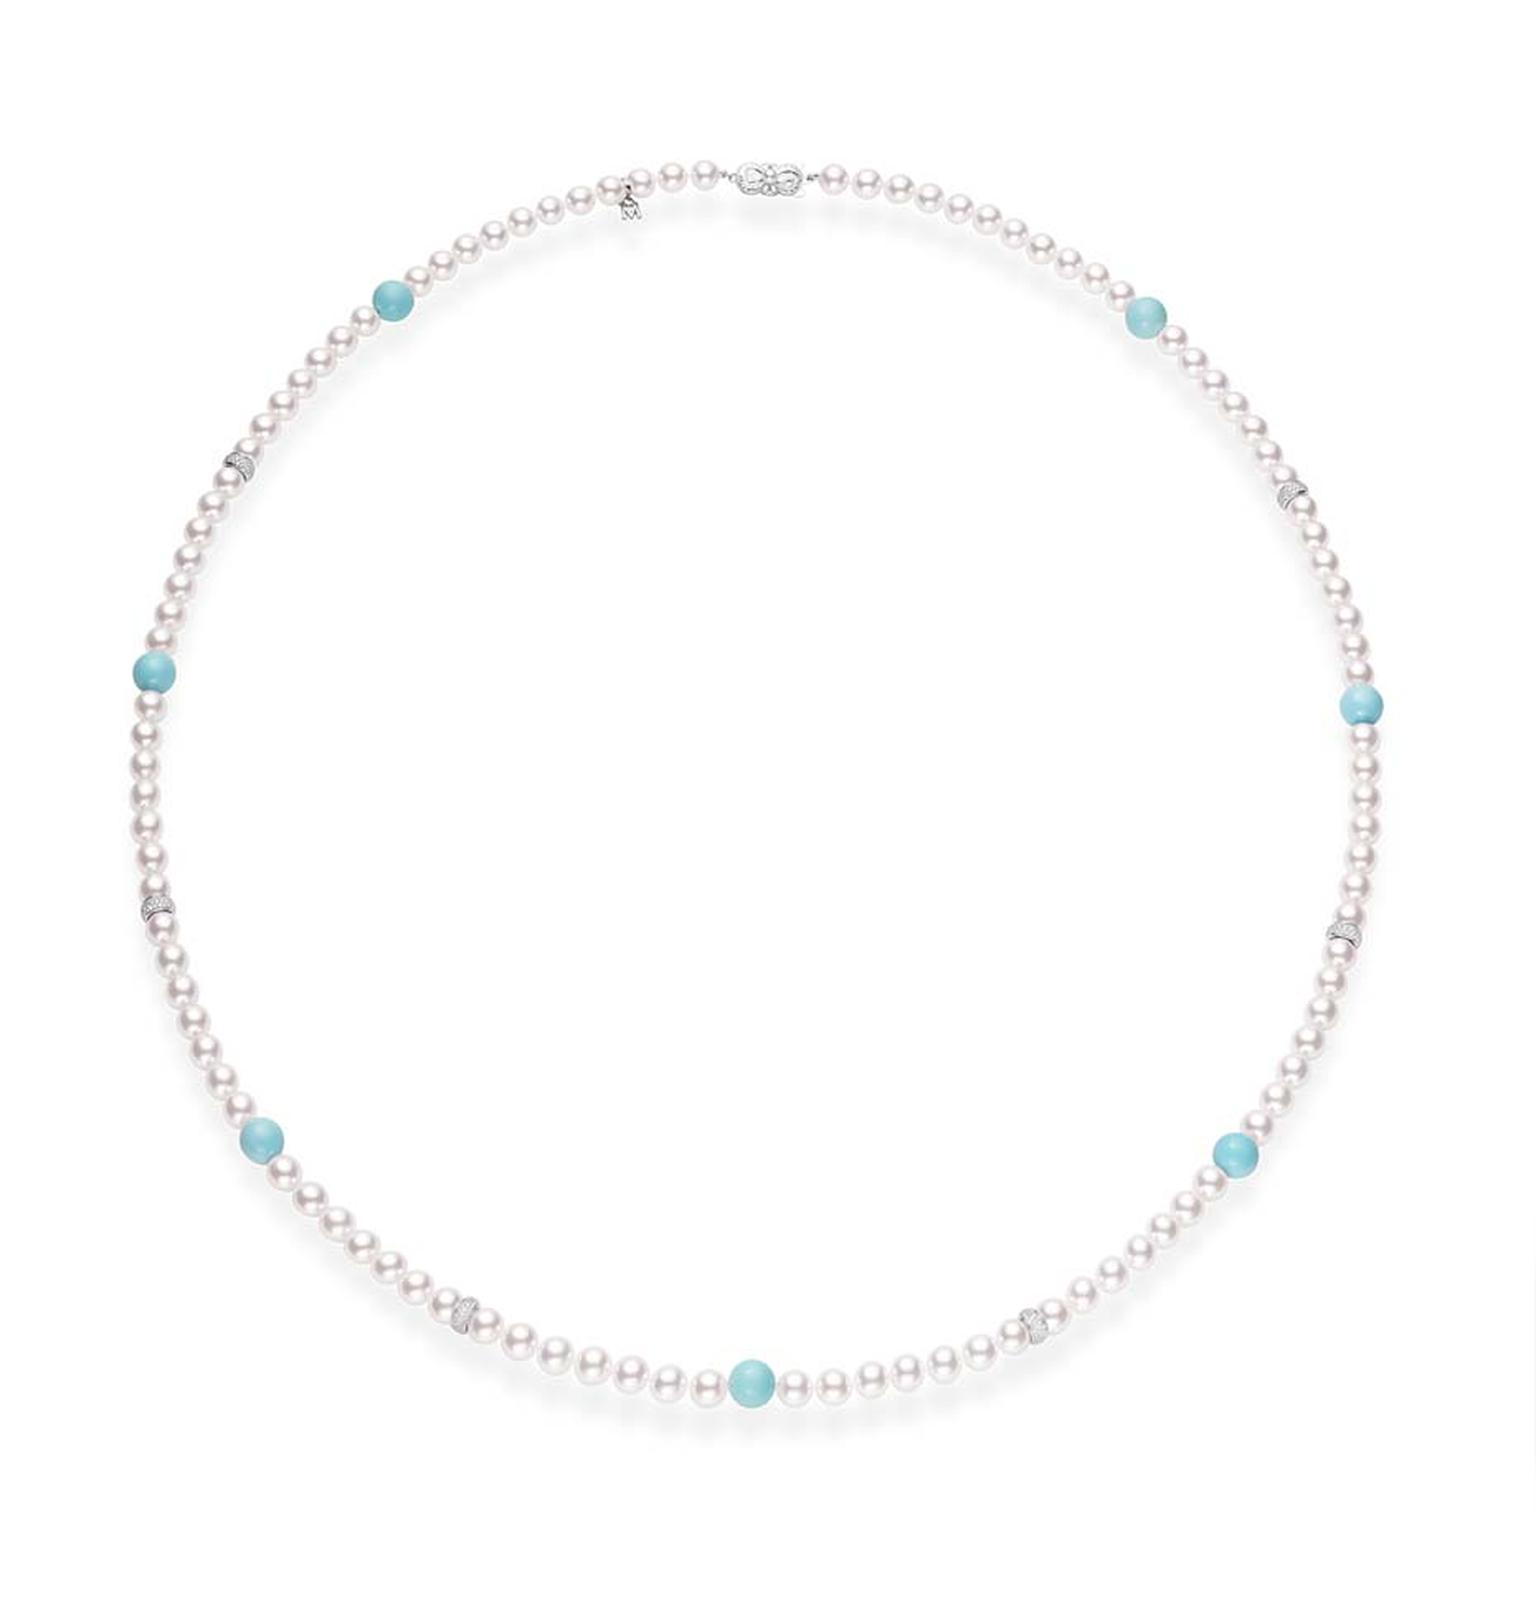 Mikimoto single strand Ayoya cultured pearl necklace with turquoise beads.